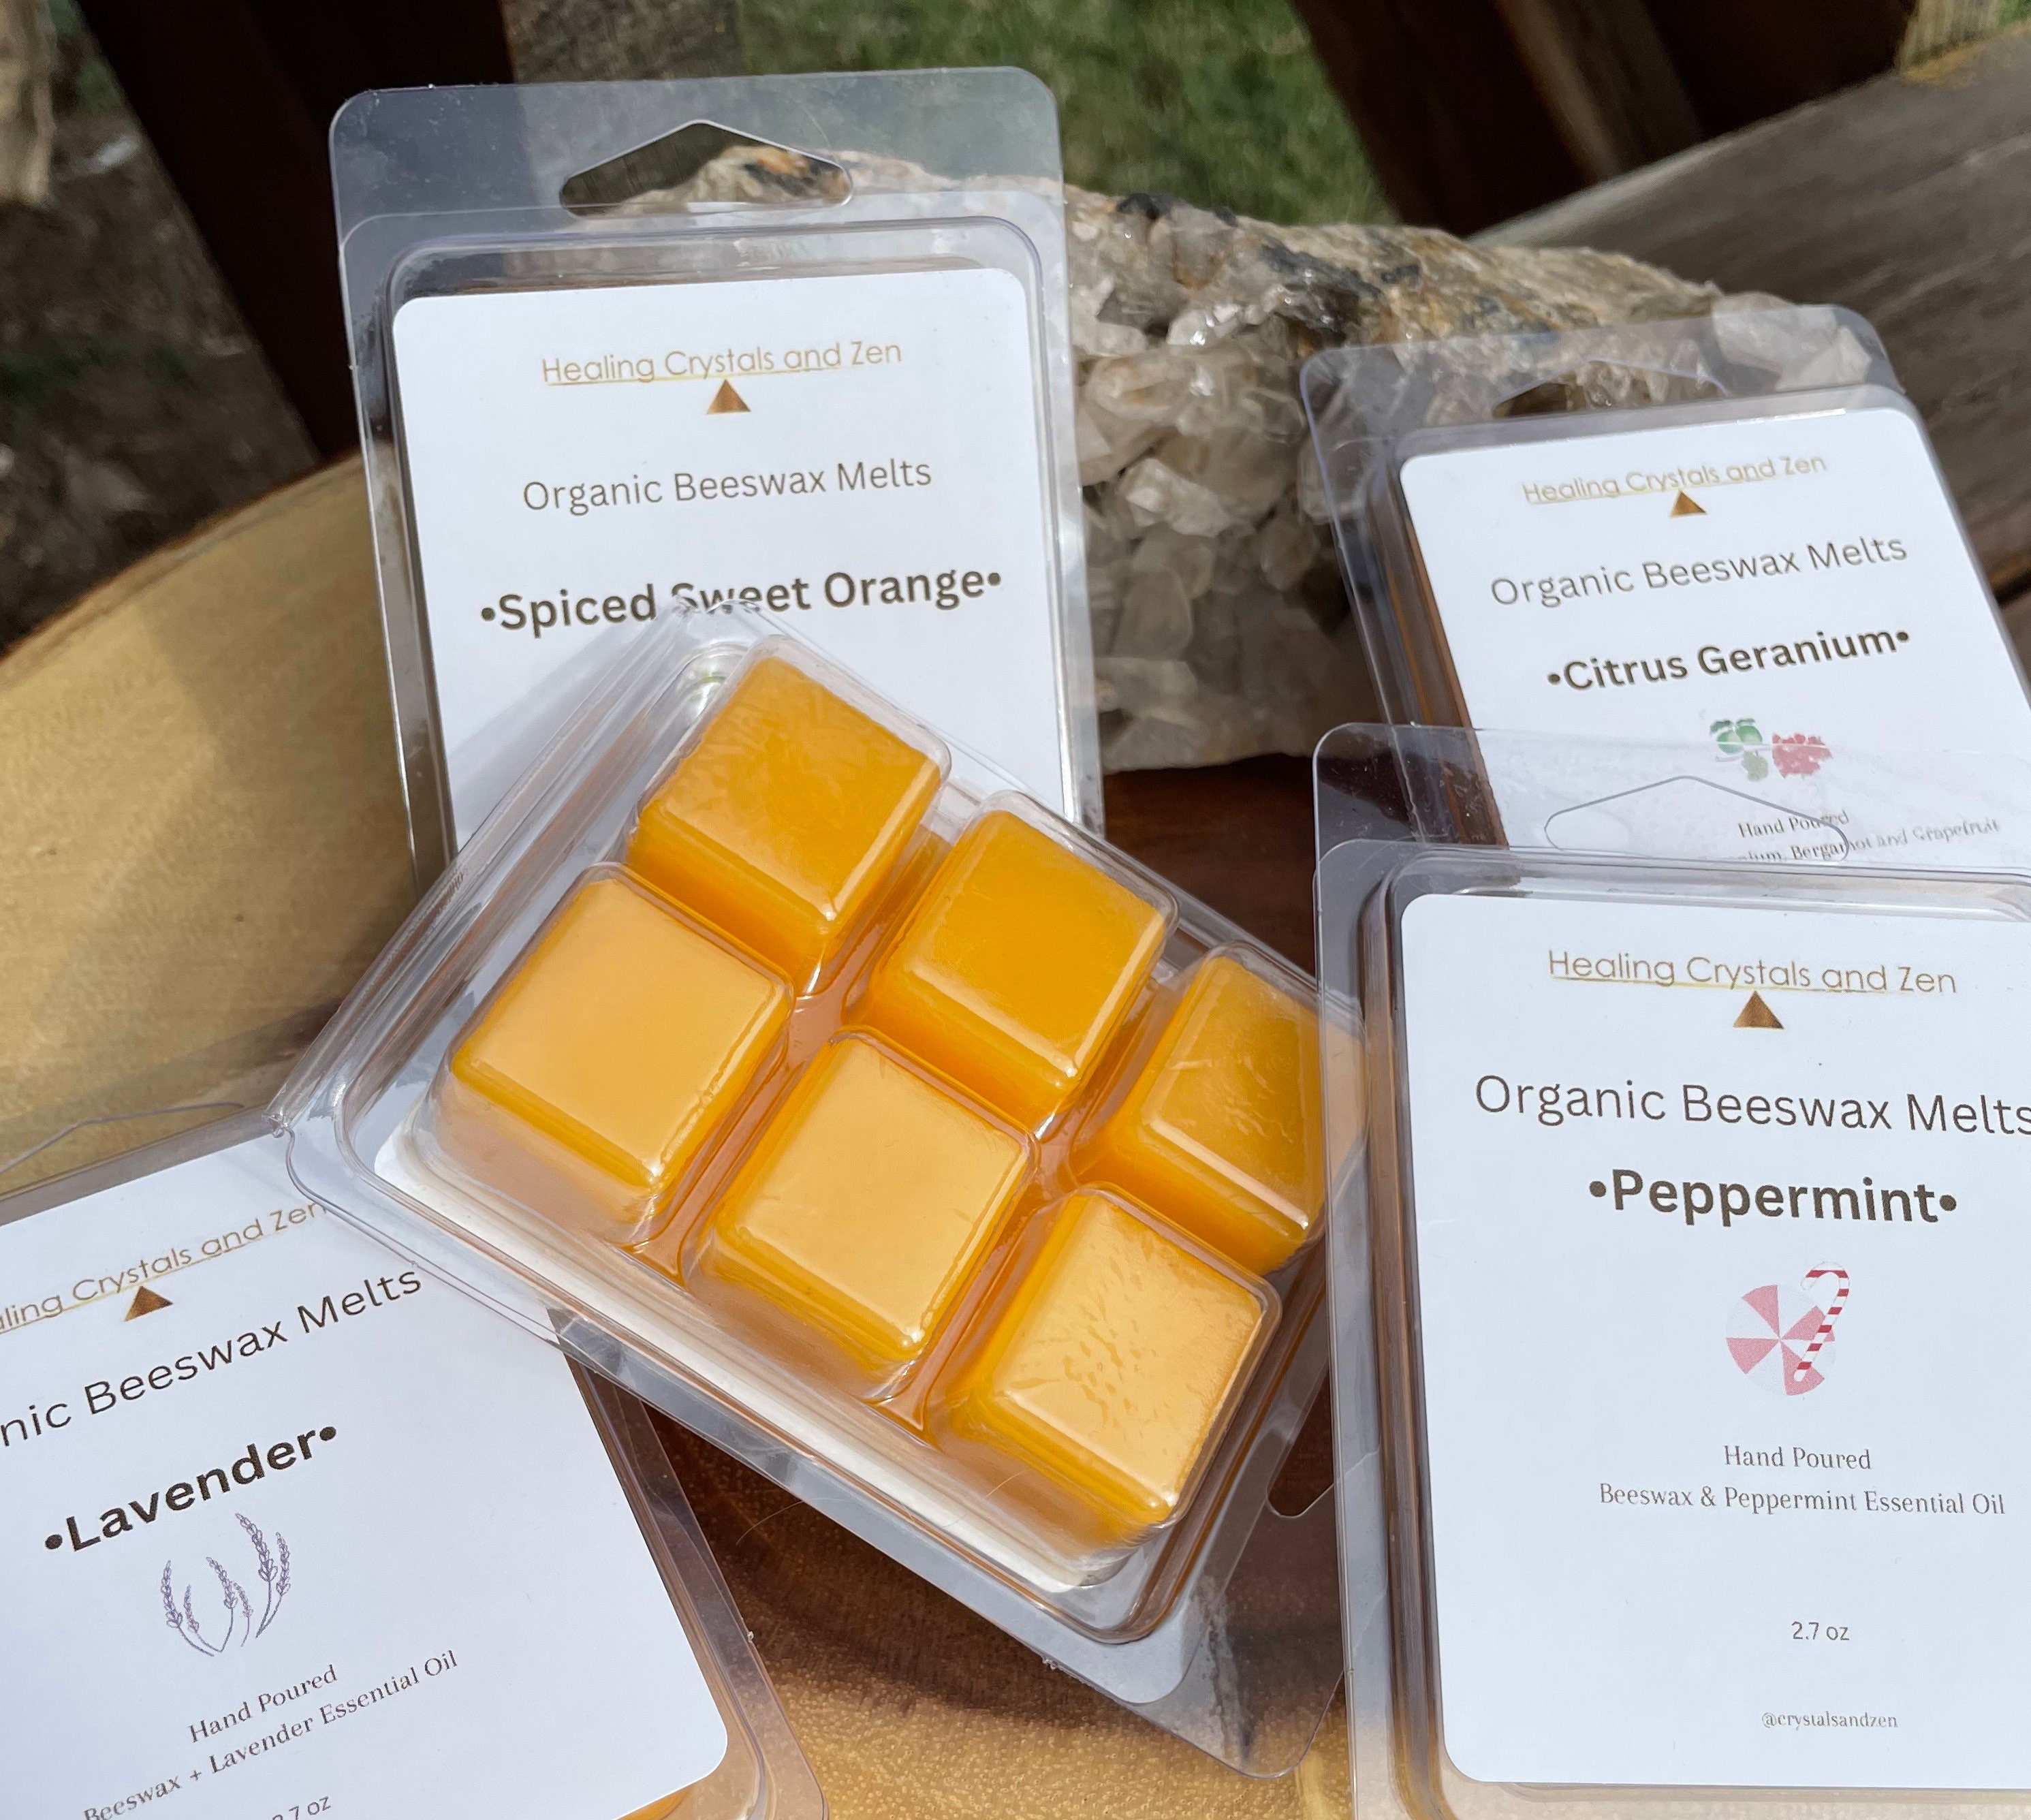 Pure organic Beeswax melts made with local Georgia beeswax in a